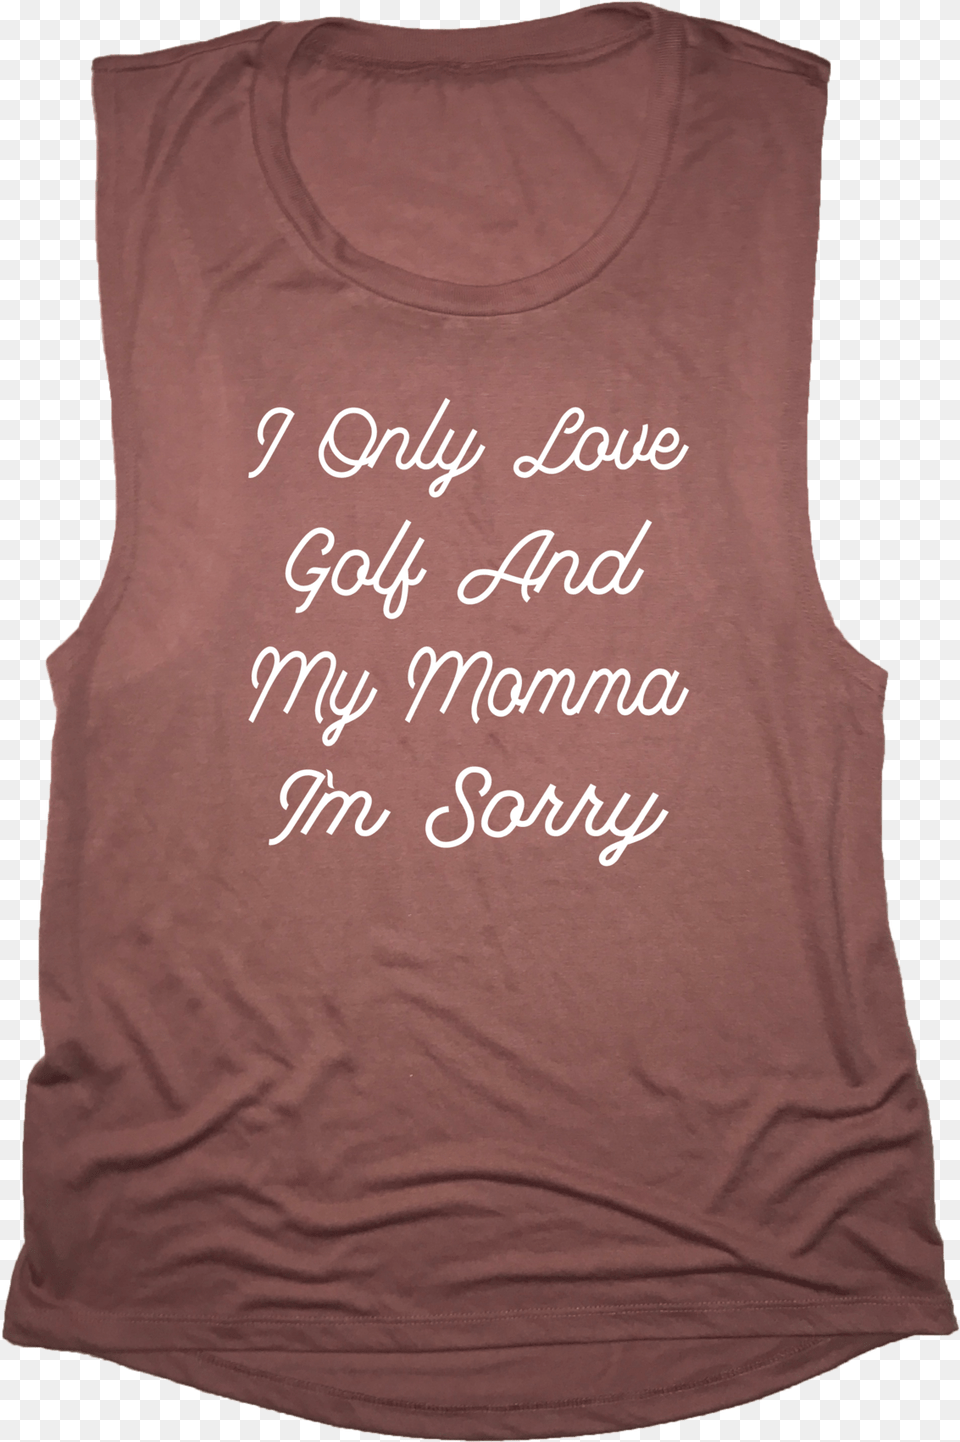 I M Sorry Active Tank, Clothing, Tank Top, Vest Png Image